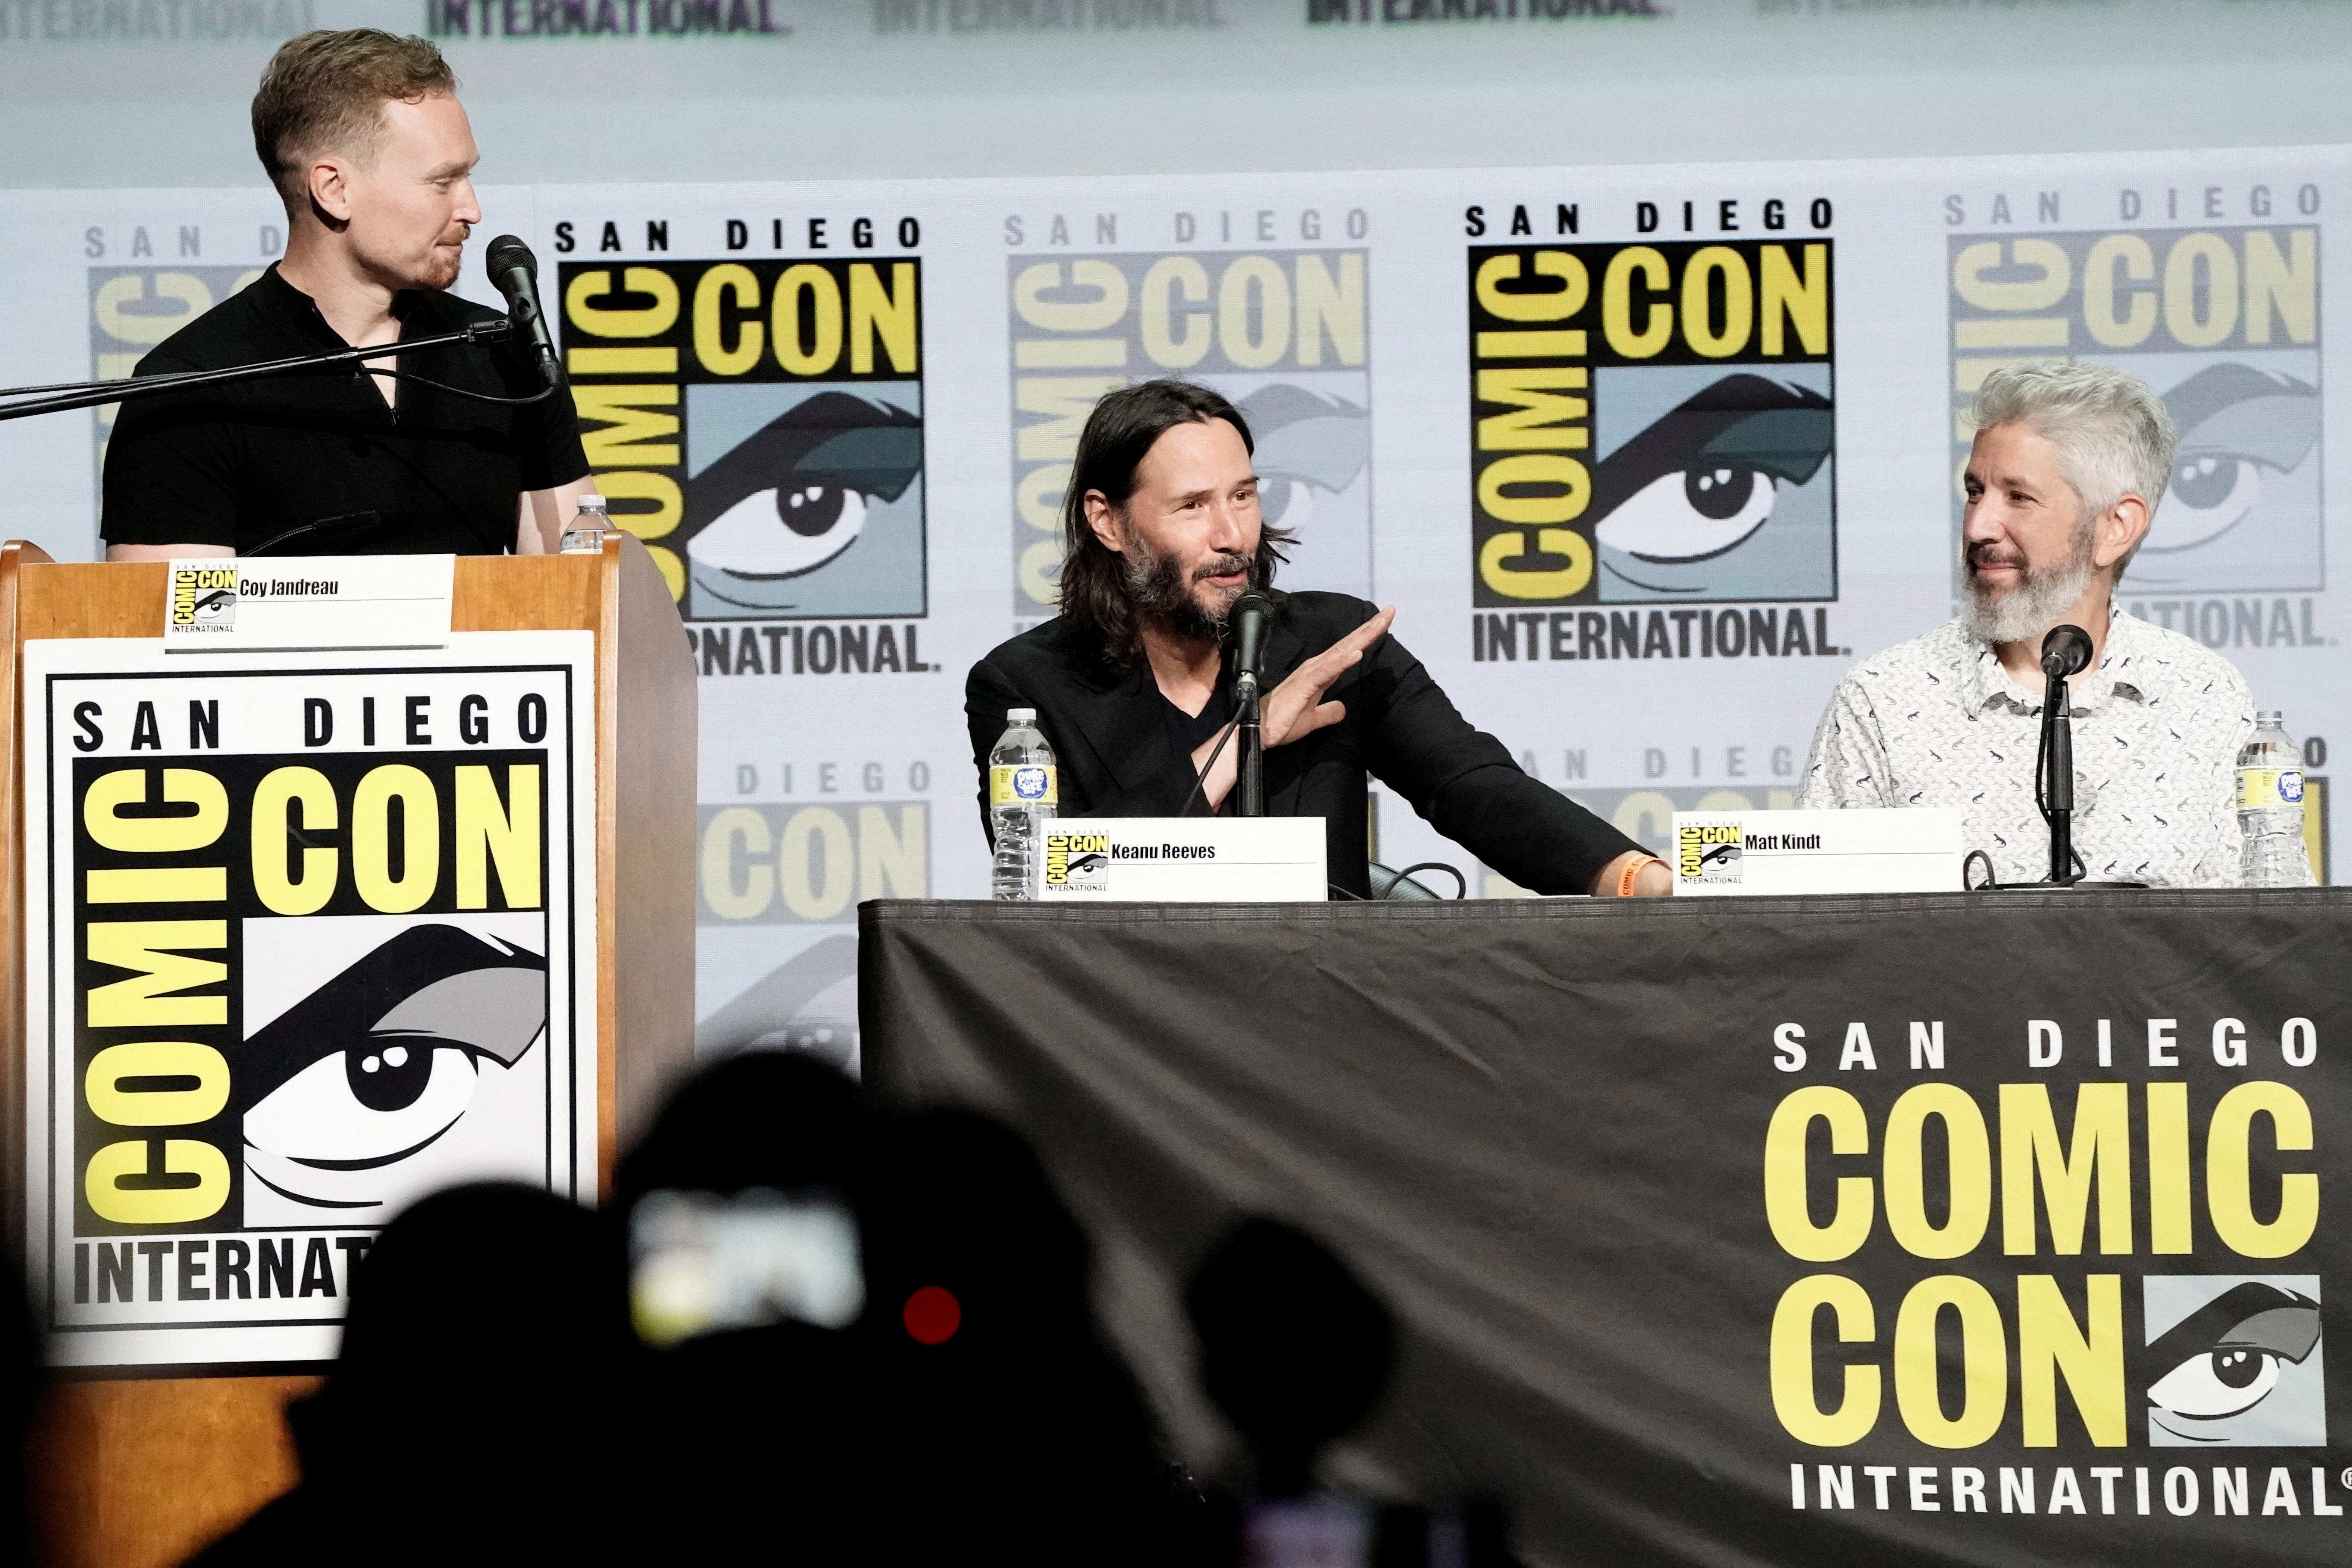 Keanu Reeves speaks during a panel about his comic book series, BRZRKR, with moderator Coy Jandreau and co-creator Matt Kindt (right) at Comic-Con International in San Diego, California, US, July 22, 2022. REUTERS/Bing Guan